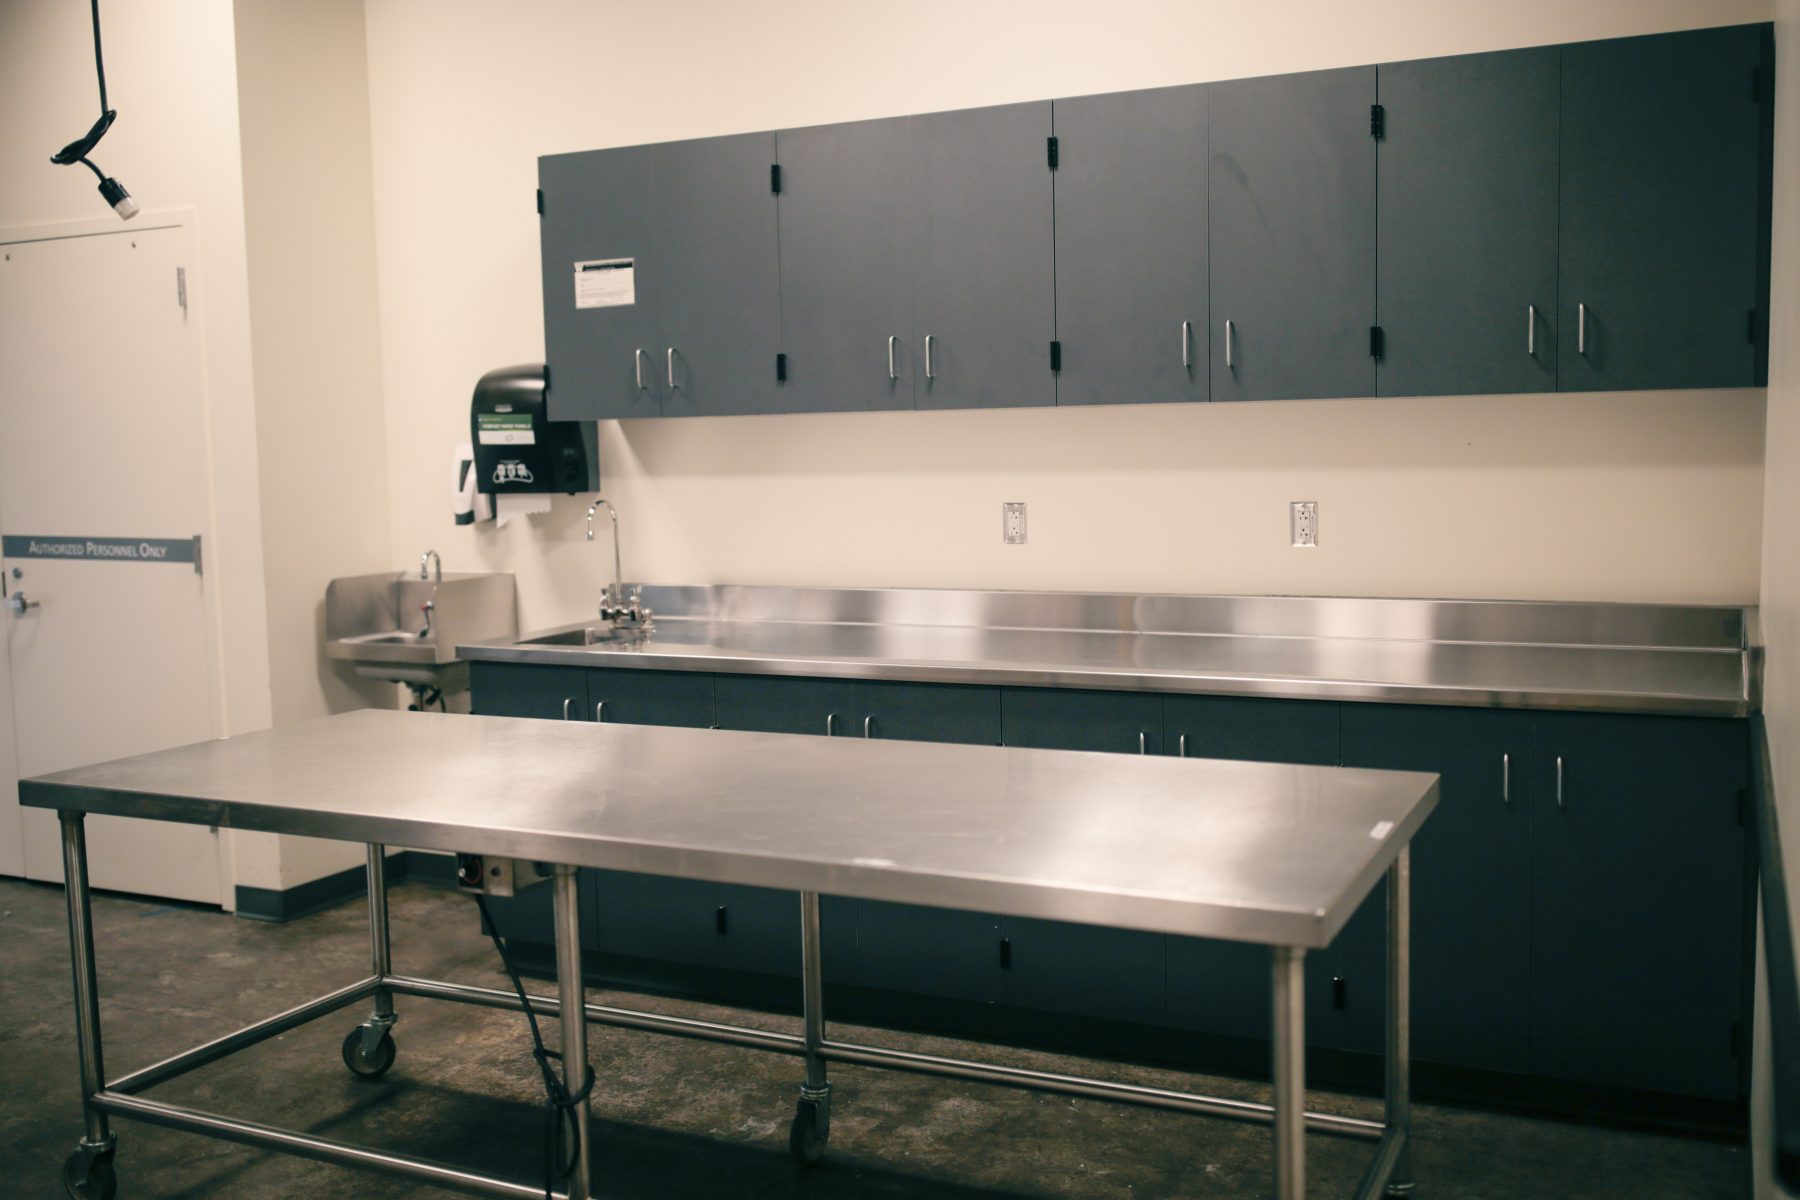 A handwashing sink and warming table are included with this Food Staging Area